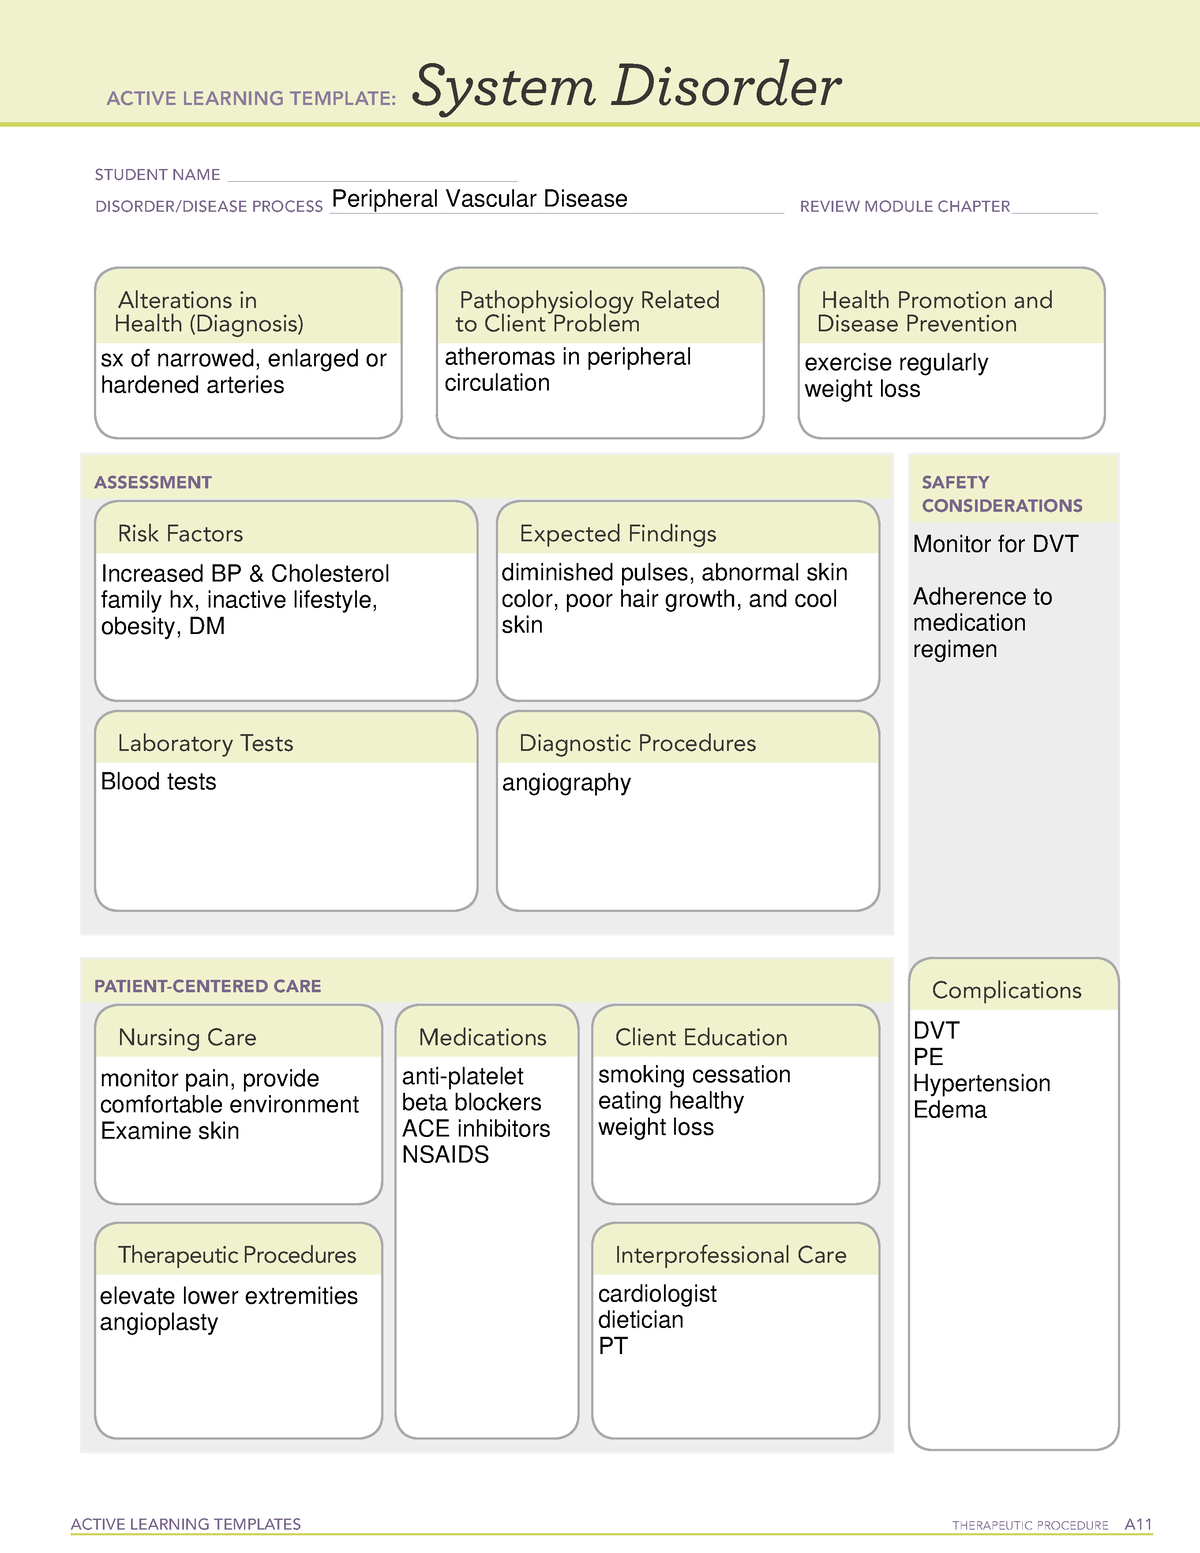 pvd-peripheral-vascular-disease-active-learning-template-ati-vn-304